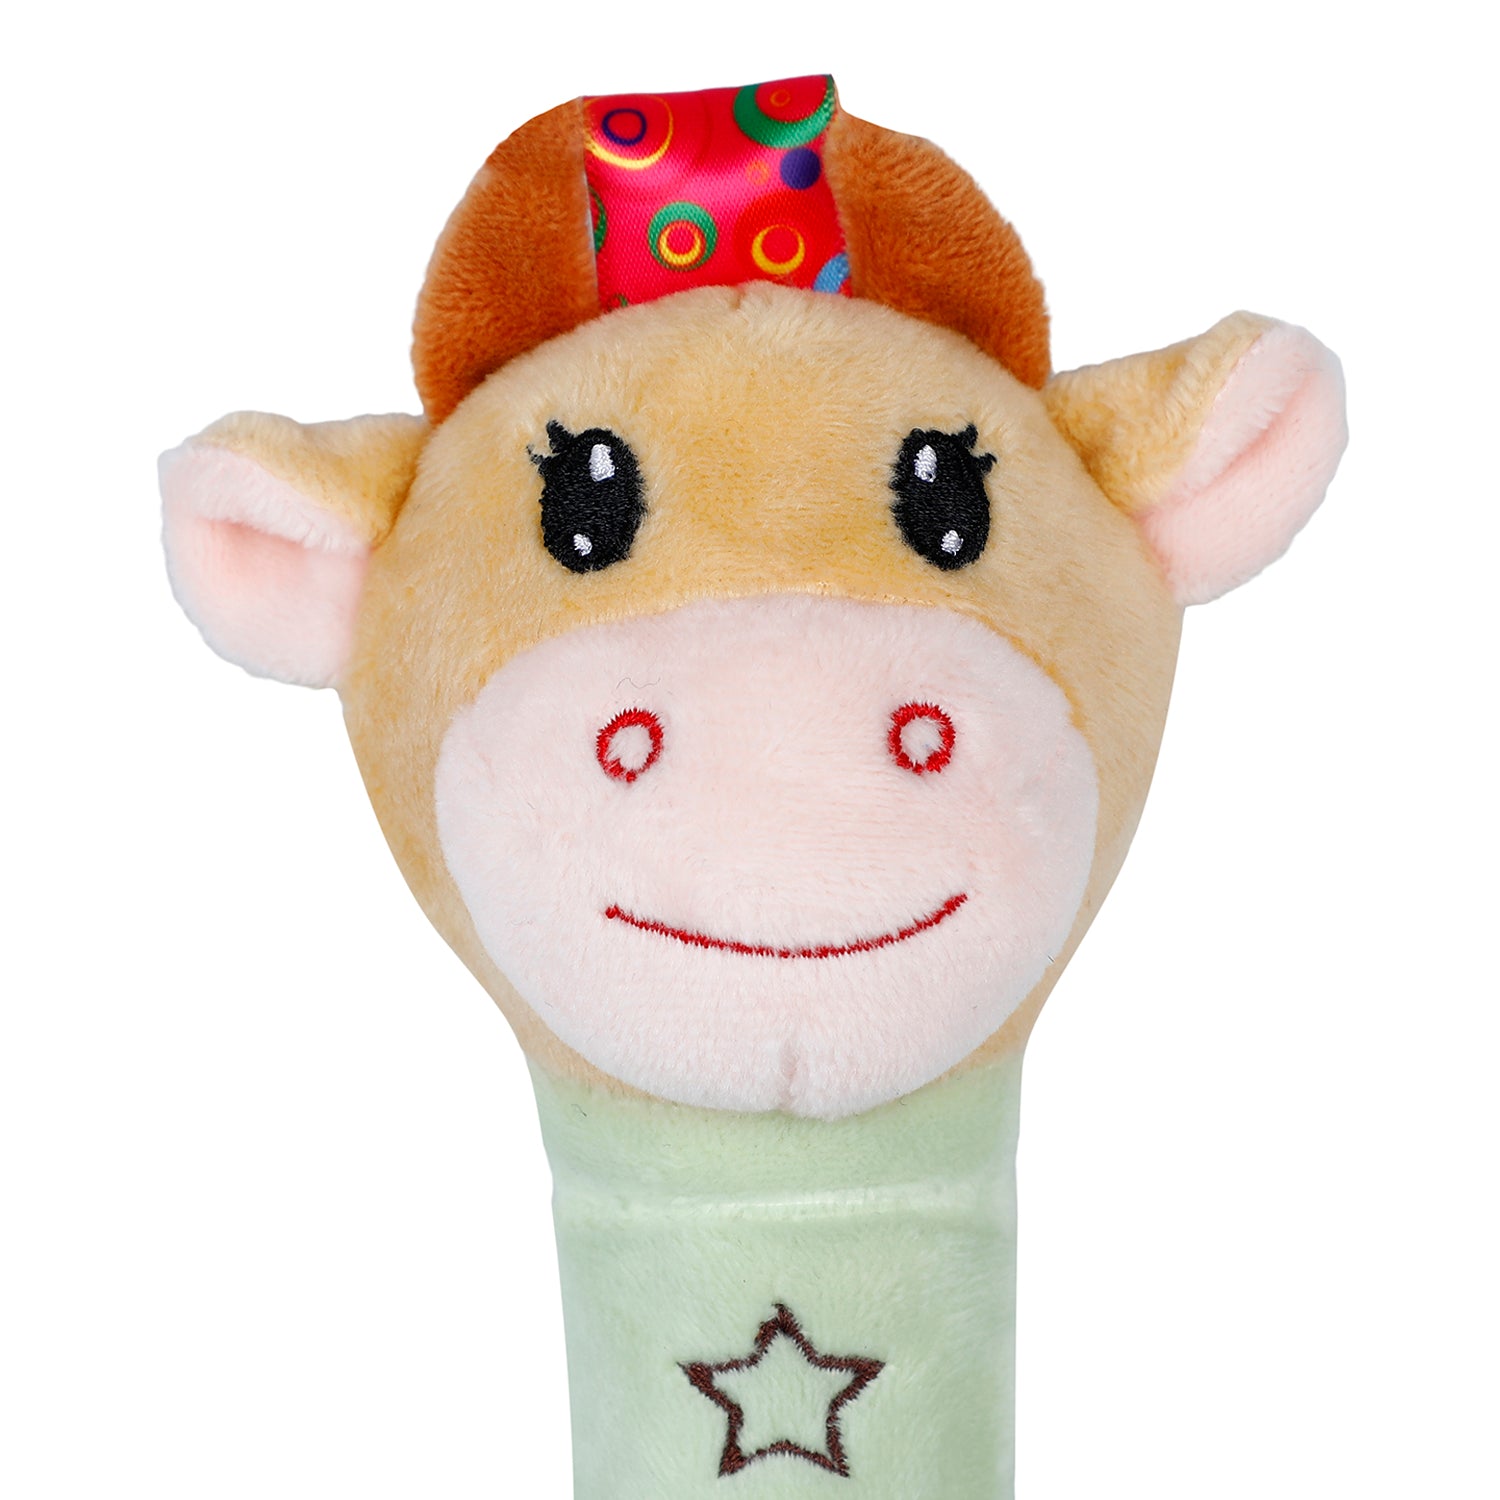 Baby Moo Cow Squeaker Sound Handheld Rattle Toy - Green